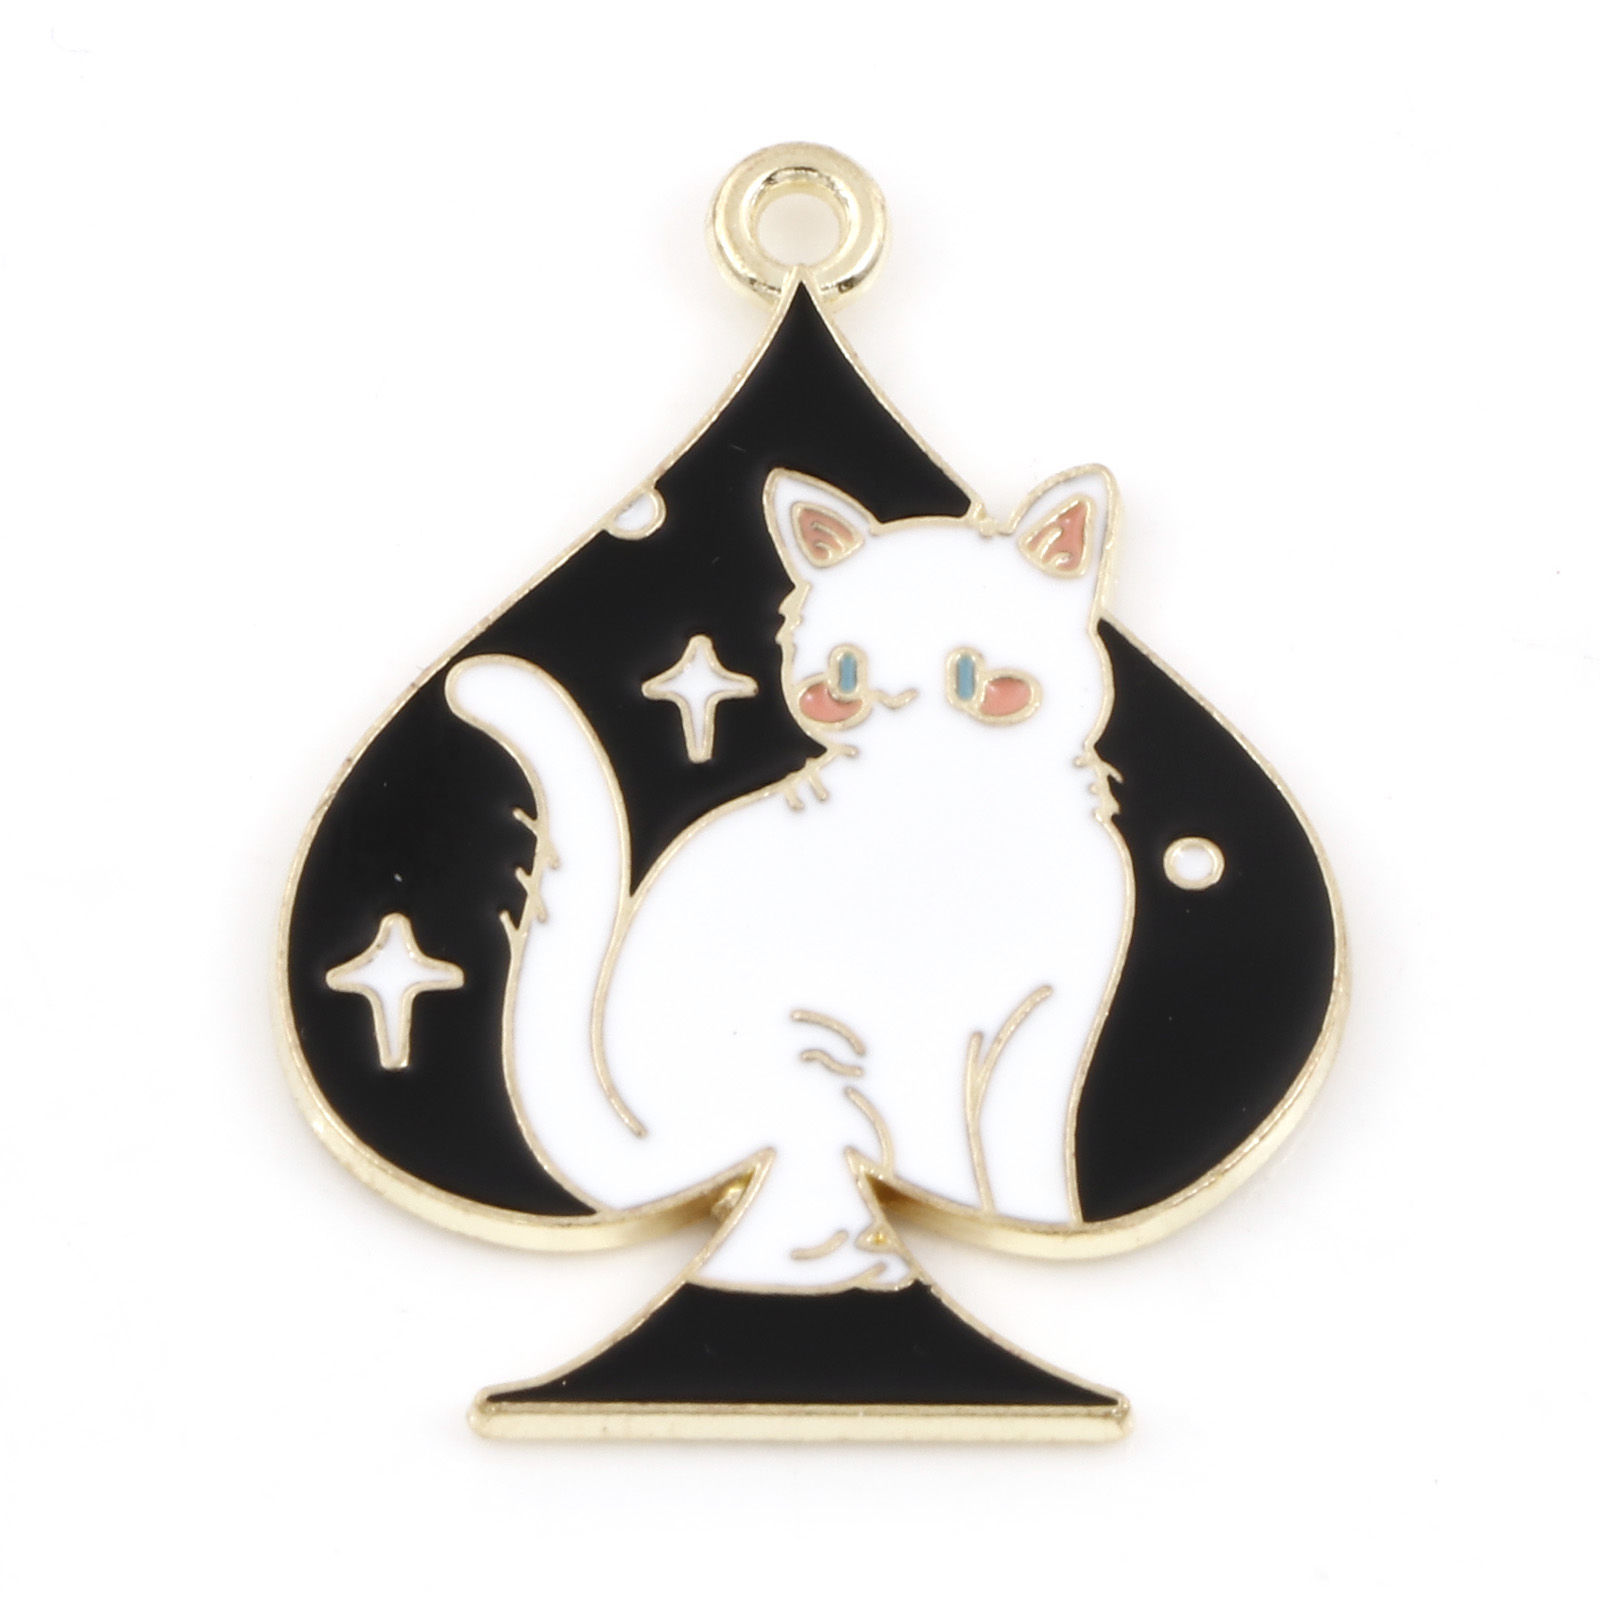 Picture of Zinc Based Alloy Poker/ Paper Card/ Game Card Pendants Gold Plated Black & White Cat Animal Sapdes Enamel 3.4cm x 2.5cm, 5 PCs